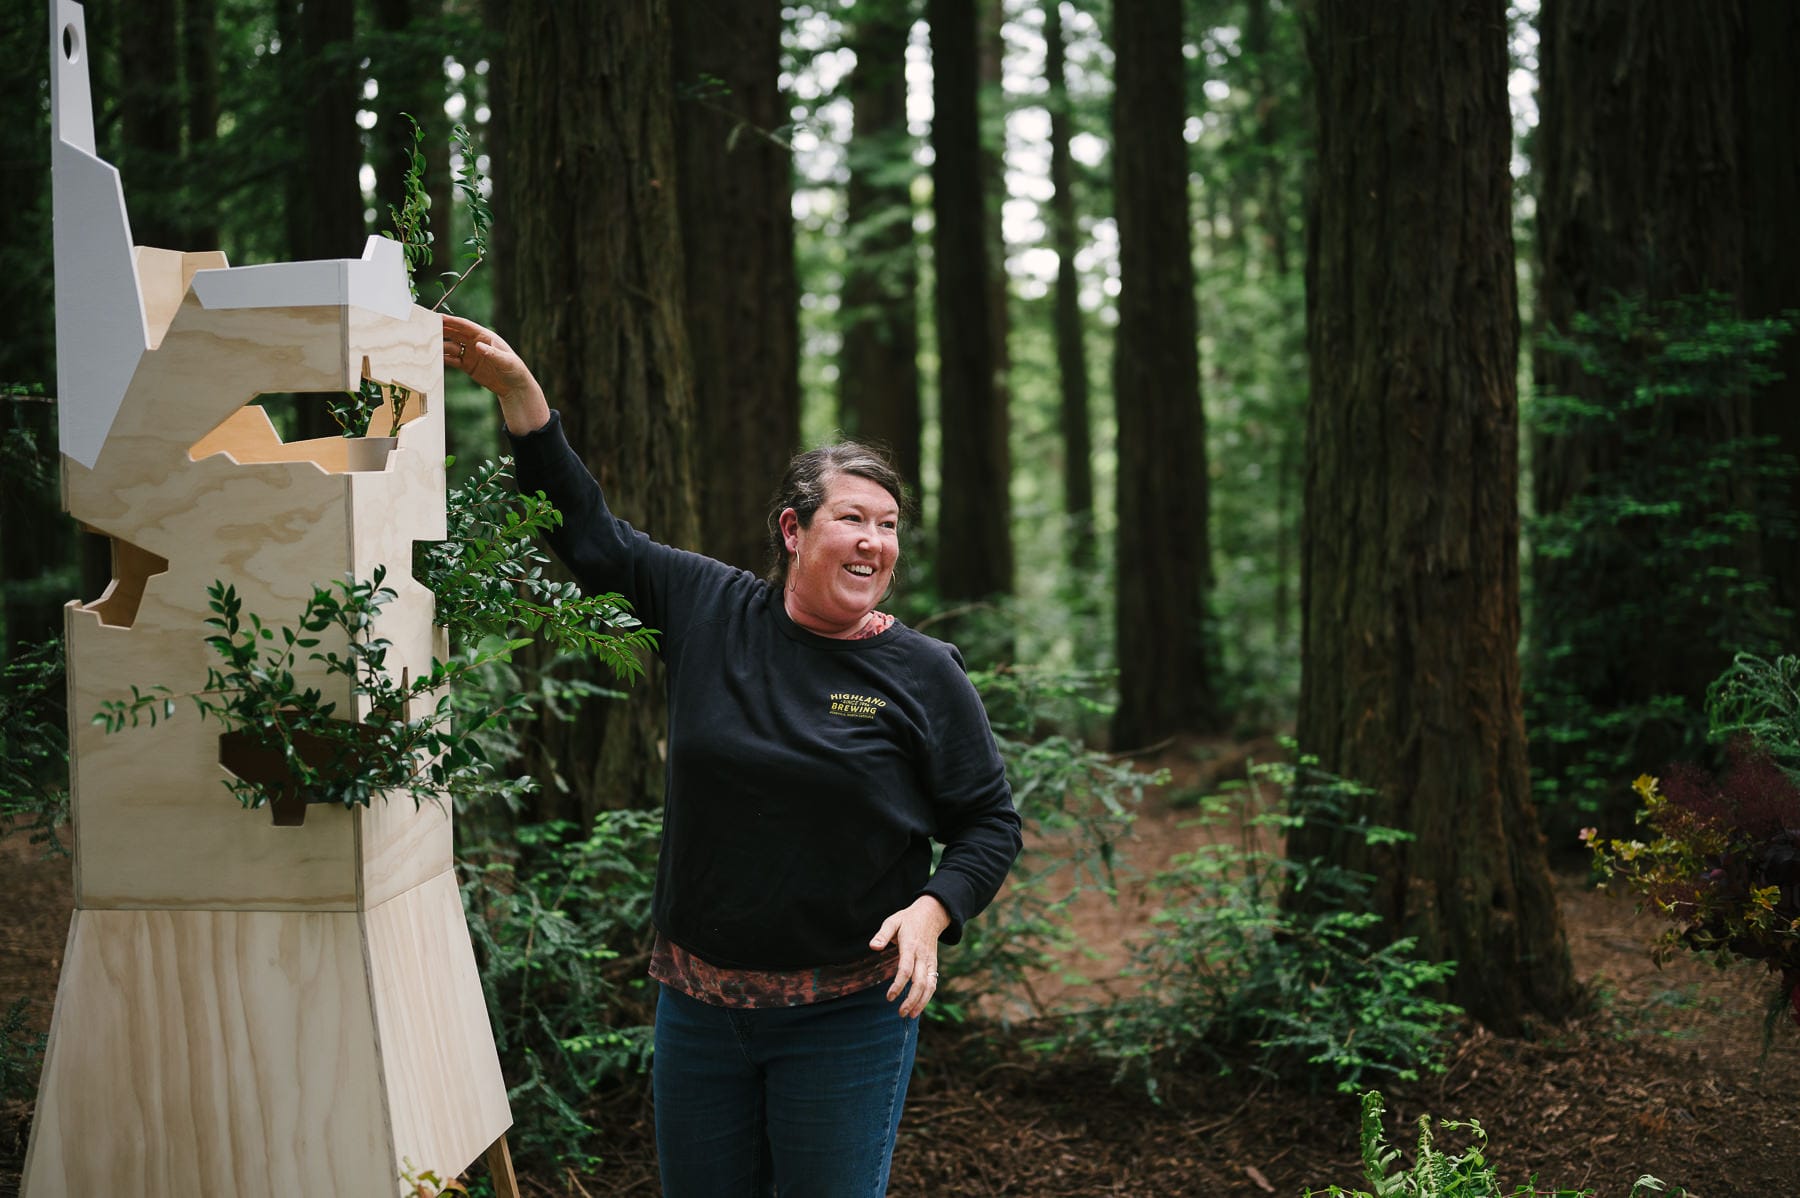 Florist, Alyson Vitt, adds flowers to a custom built box in the redwoods for a wedding at Roberts Regional Recreation Area in Oakland.